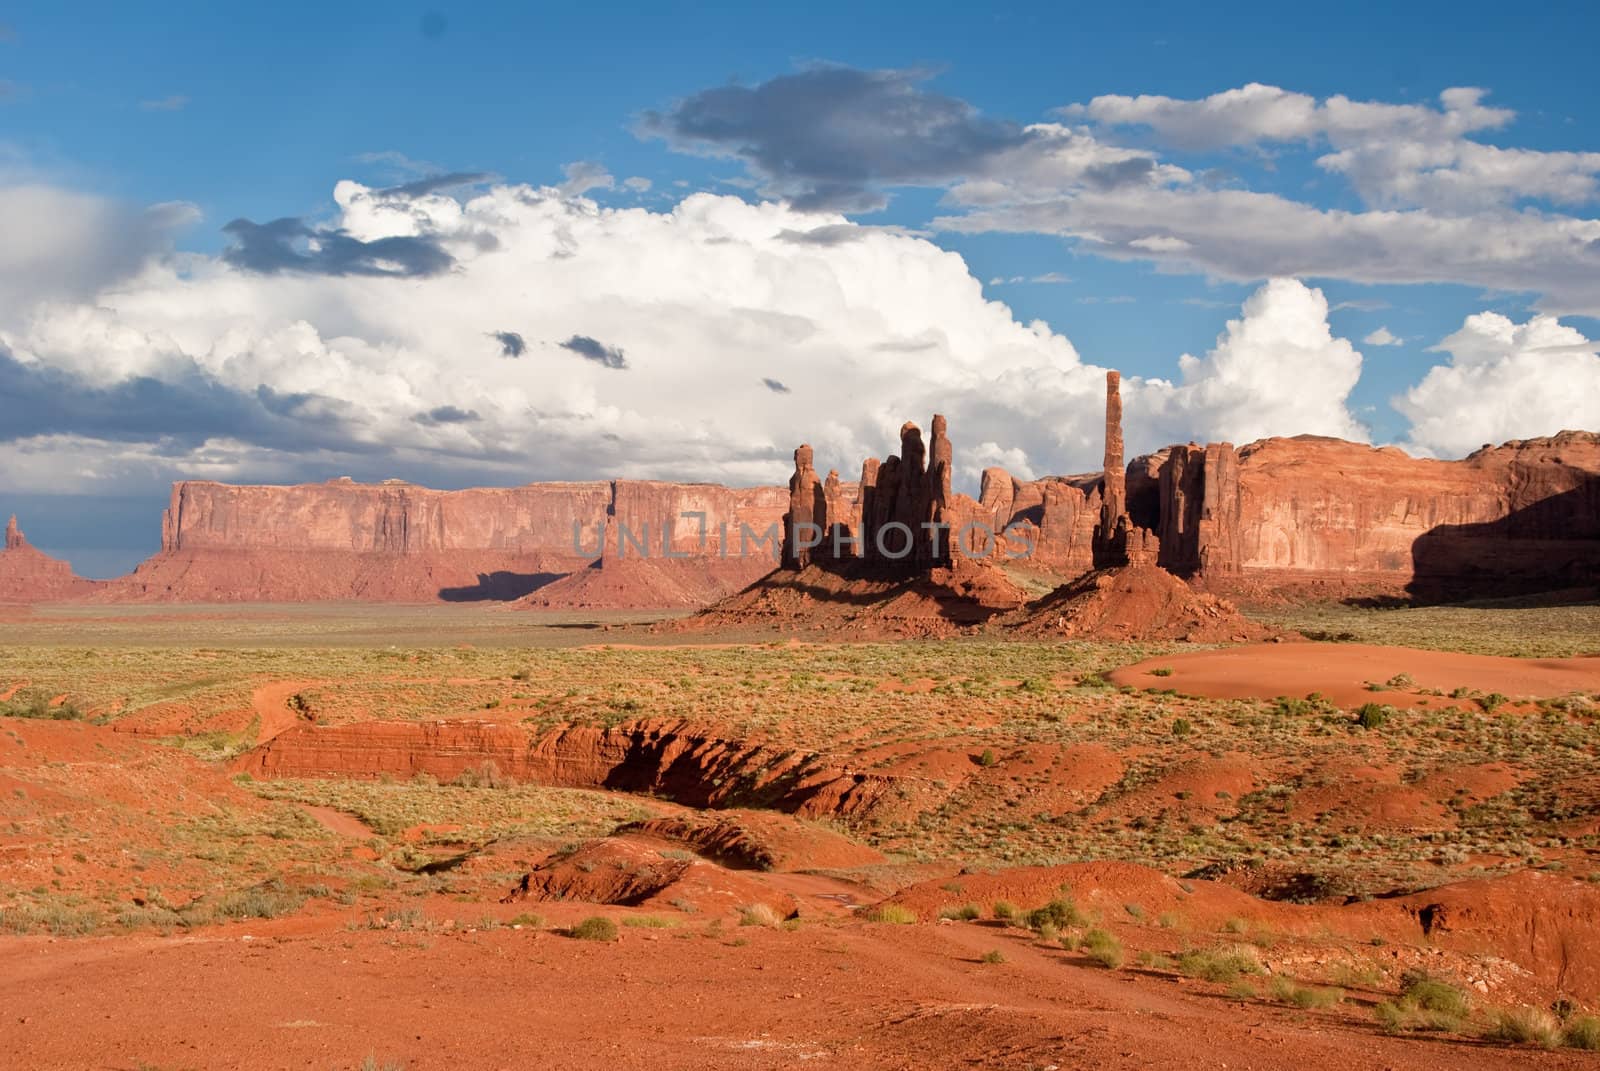 Storm clouds gather over Monument Valley by emattil